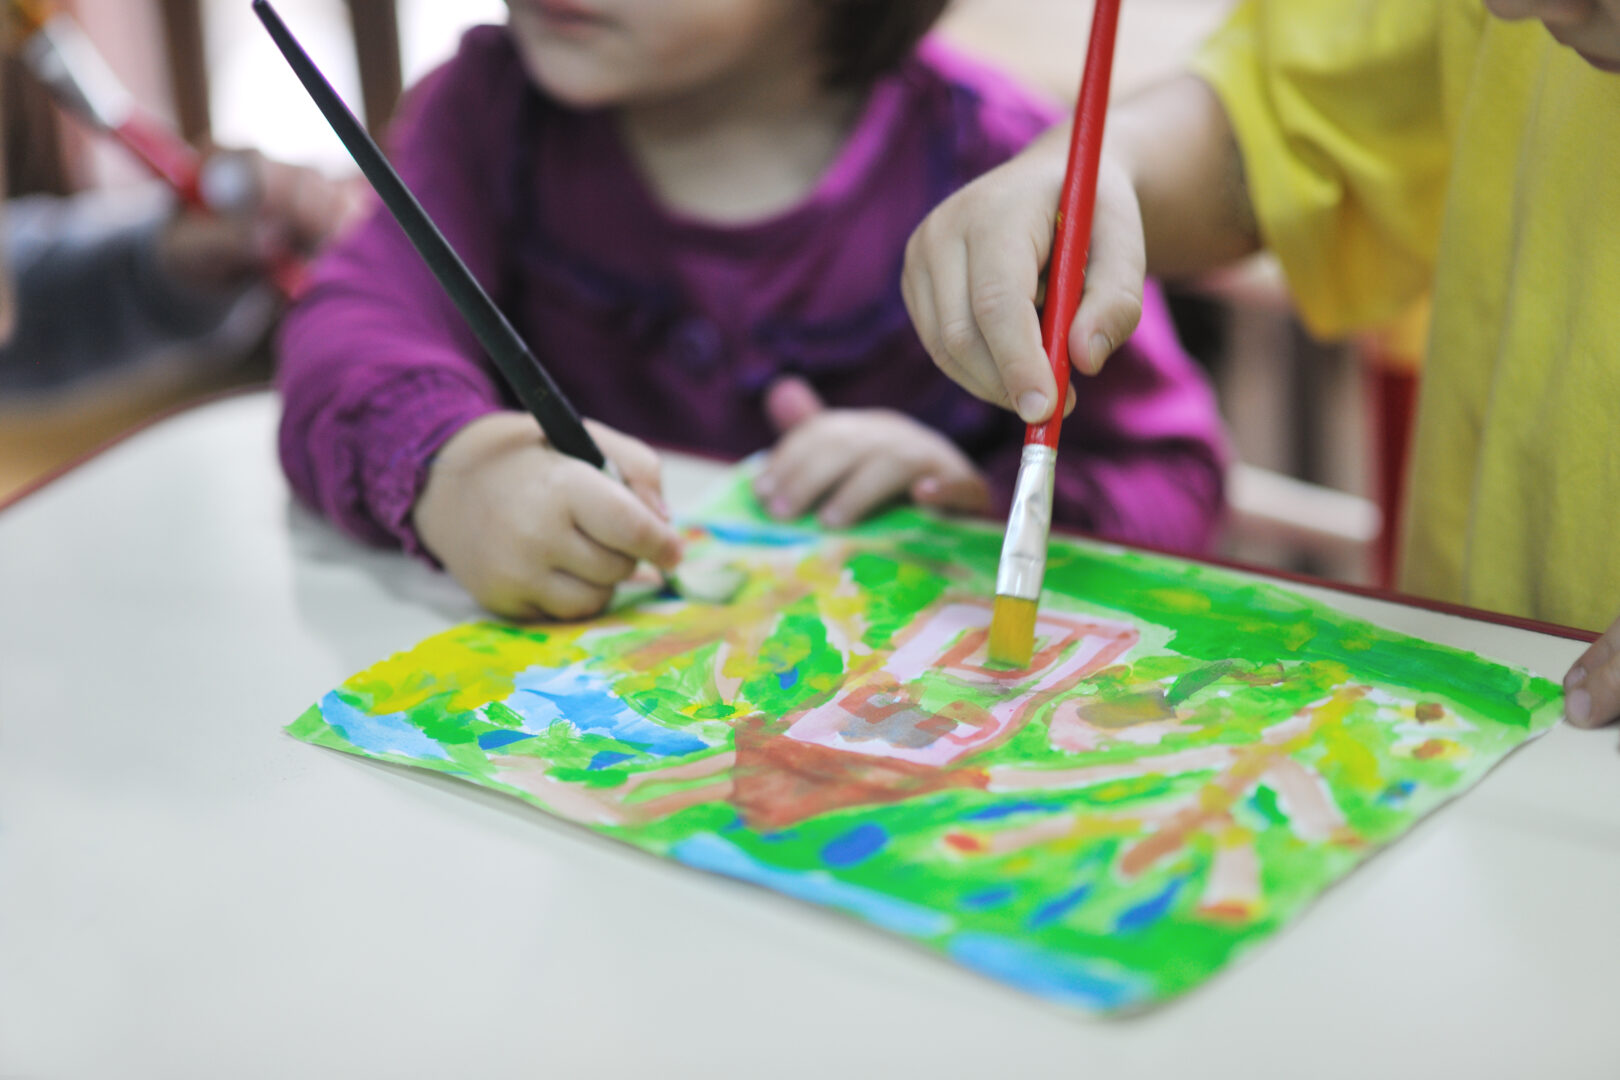 Close up of two young children painting a picture of a house against a green landscape